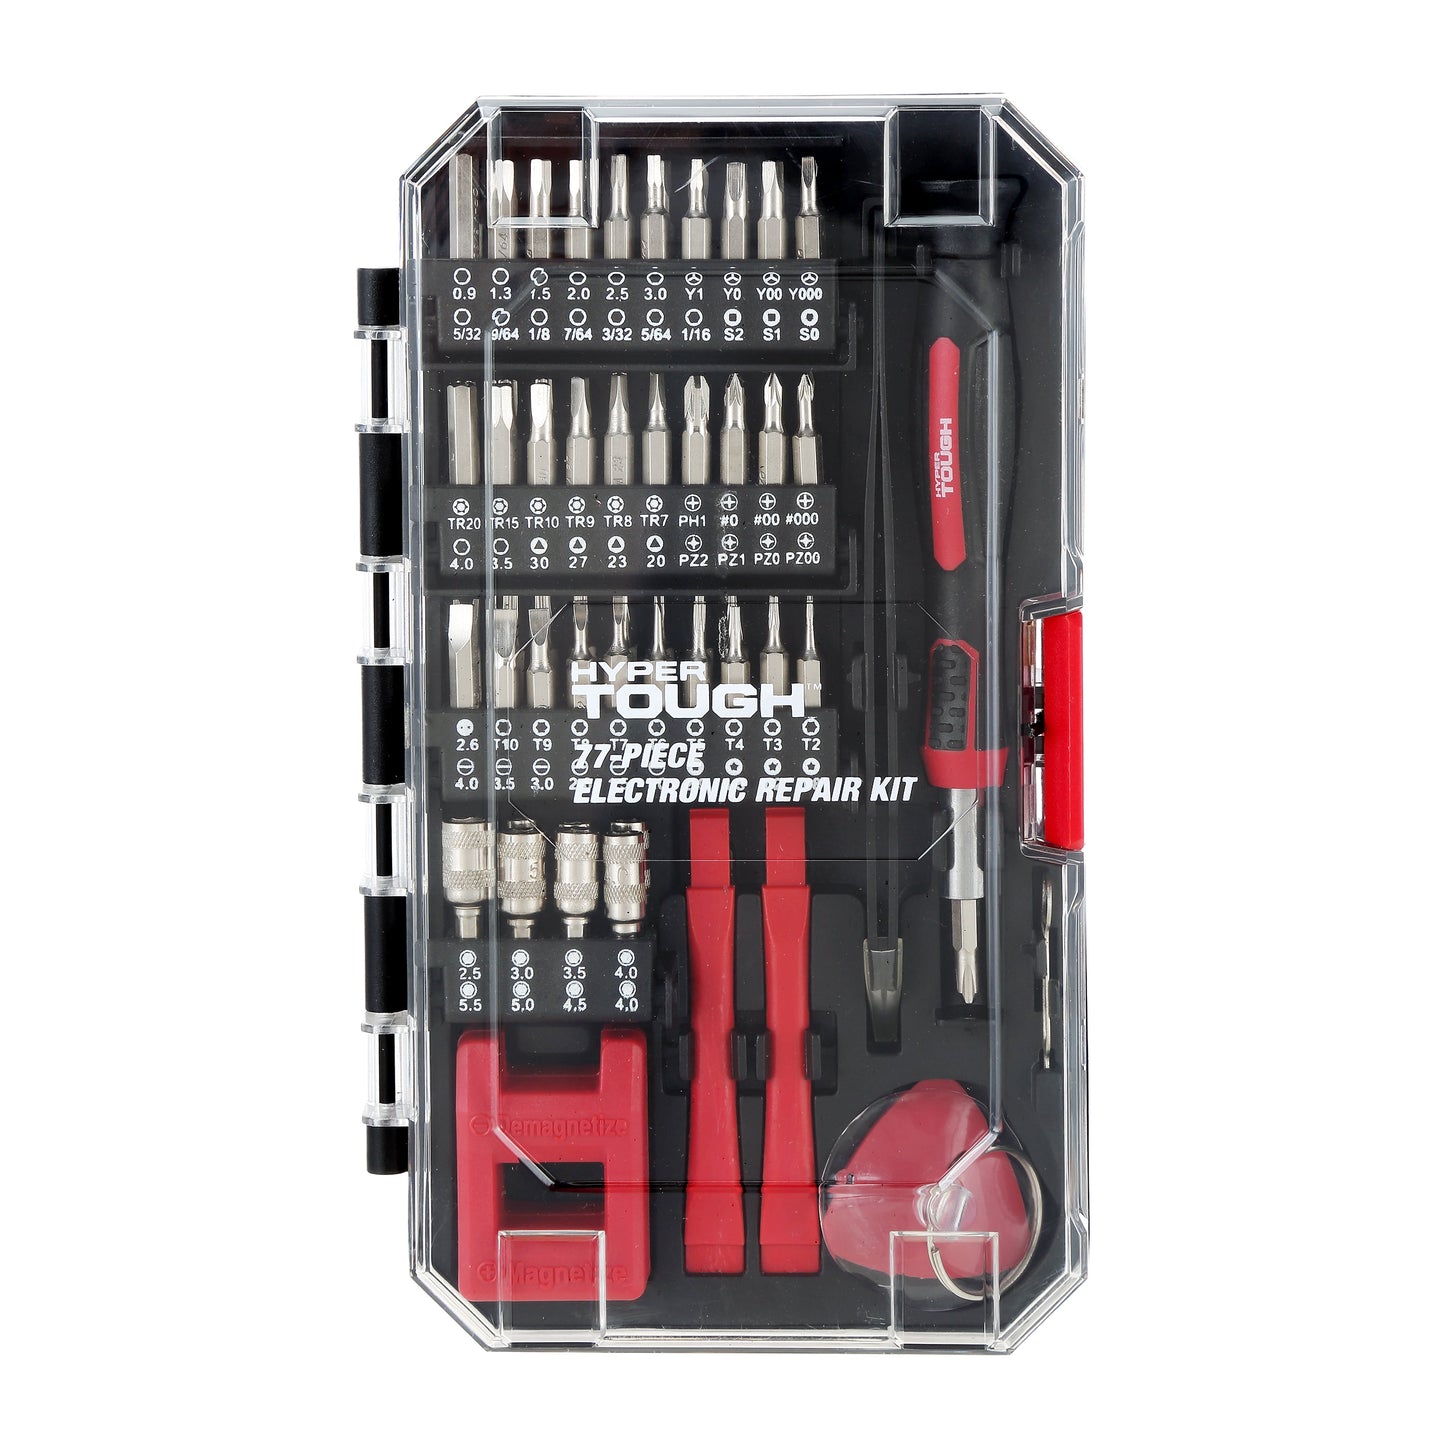 Hyper Tough 77 Piece Precision Tool Kit with Magnetic Screwdriver, Standard Size Bits, and Case, New Condition